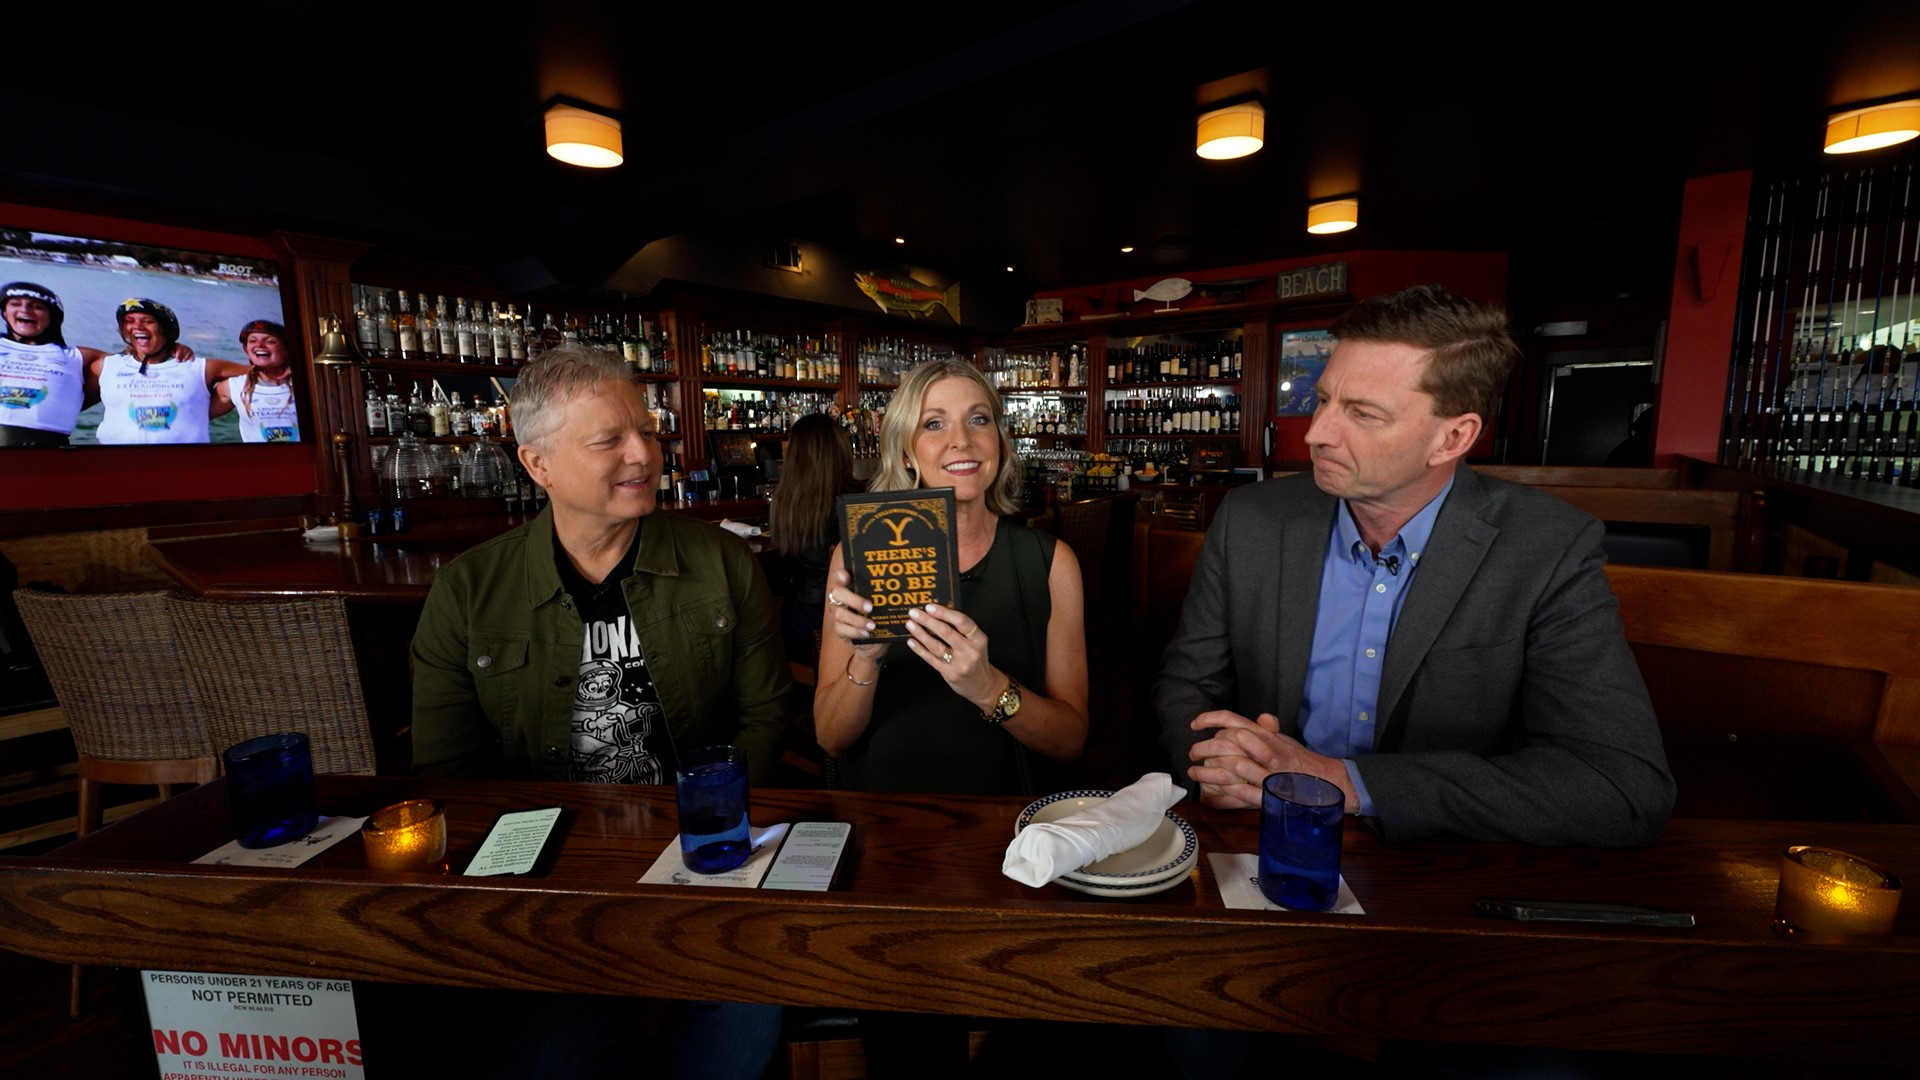 Evening hosts share what they are currently obsessed with from books to podcasts to TV shows. #k5evening